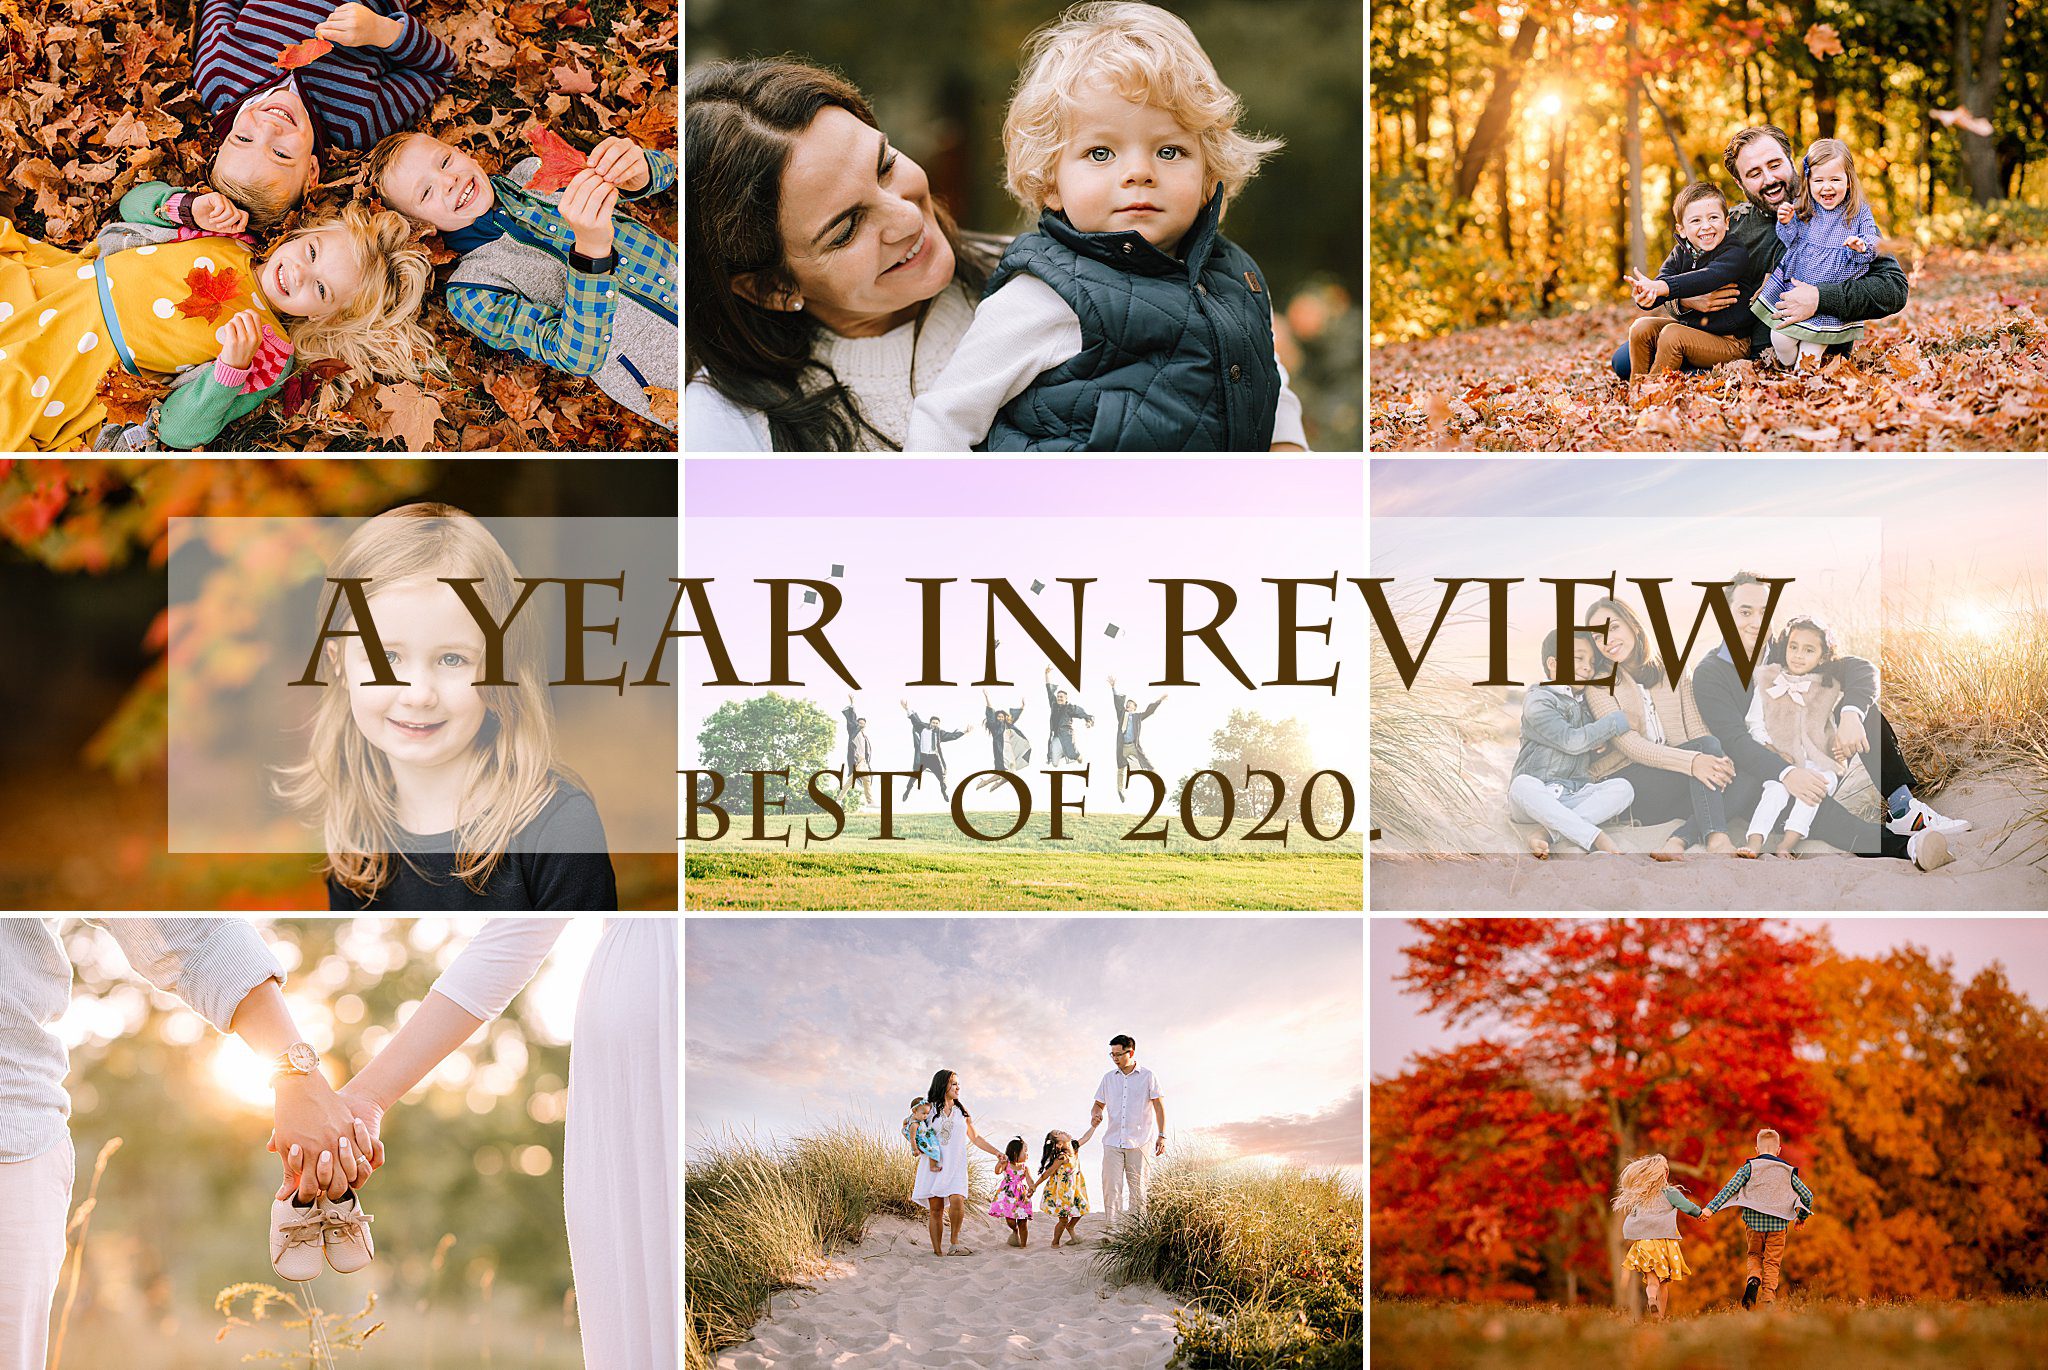 A Year in Review - Best of 2020 - Helena Goessens Photography